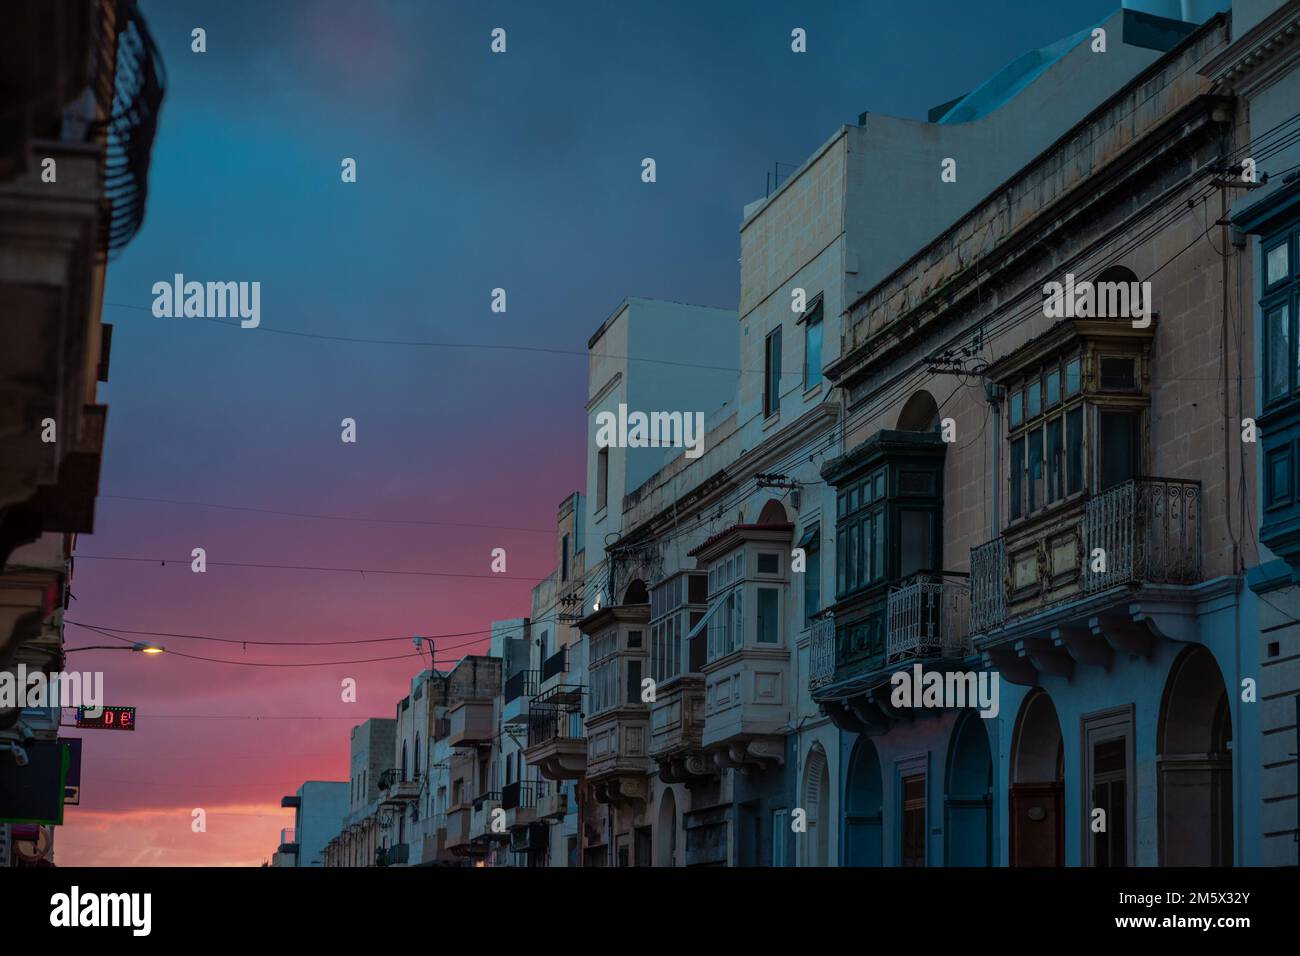 Malta Balcony. Colorful balconies in historical part of Malta close to valetta. Beautiful sky in the background with sun just setting down. Stock Photo